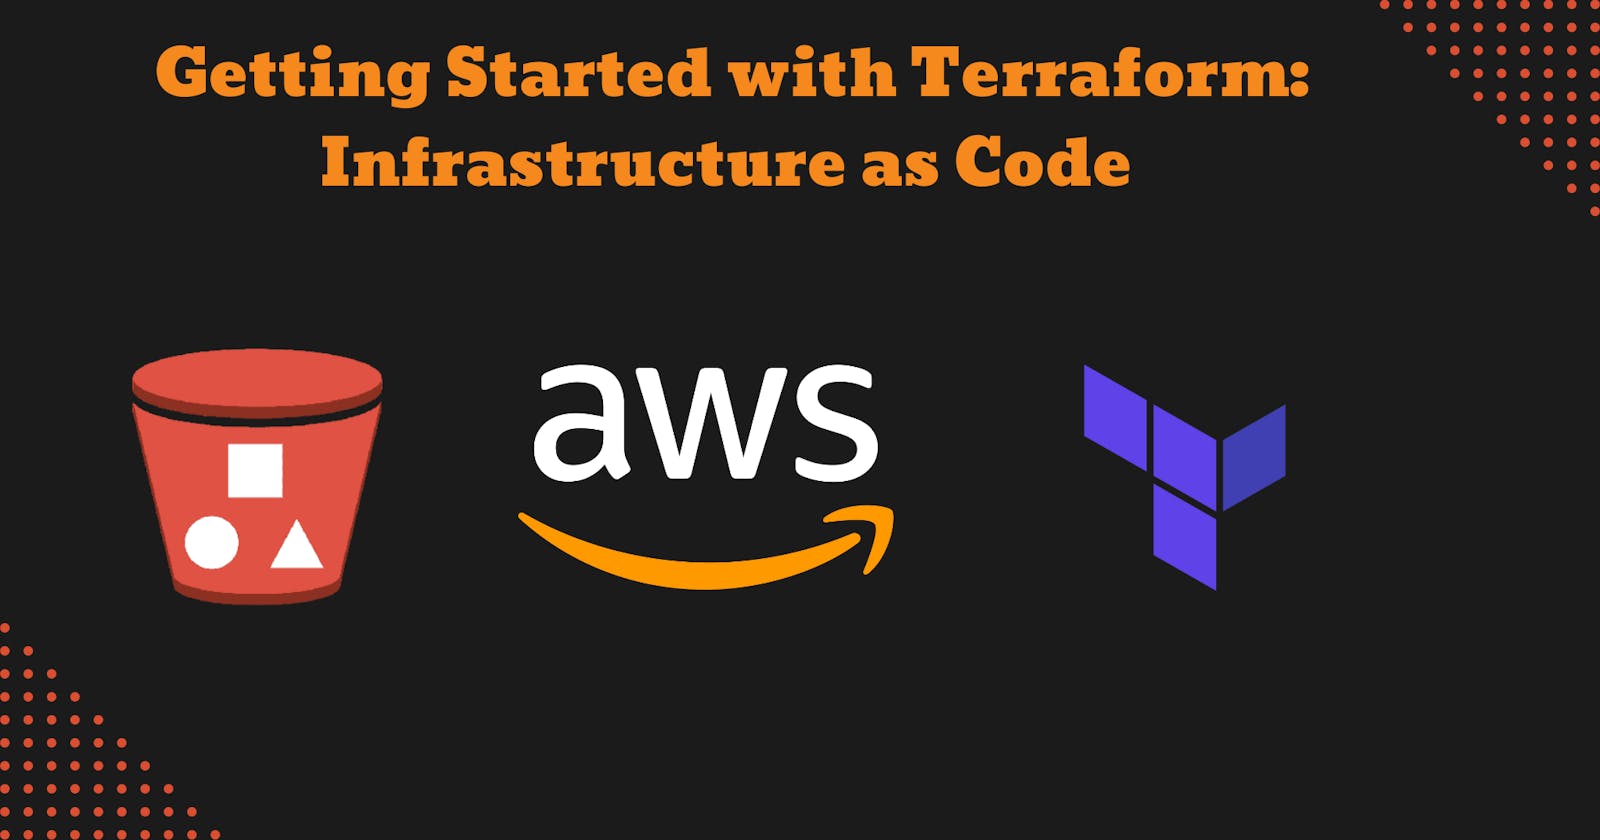 Getting Started with Terraform: Infrastructure as Code